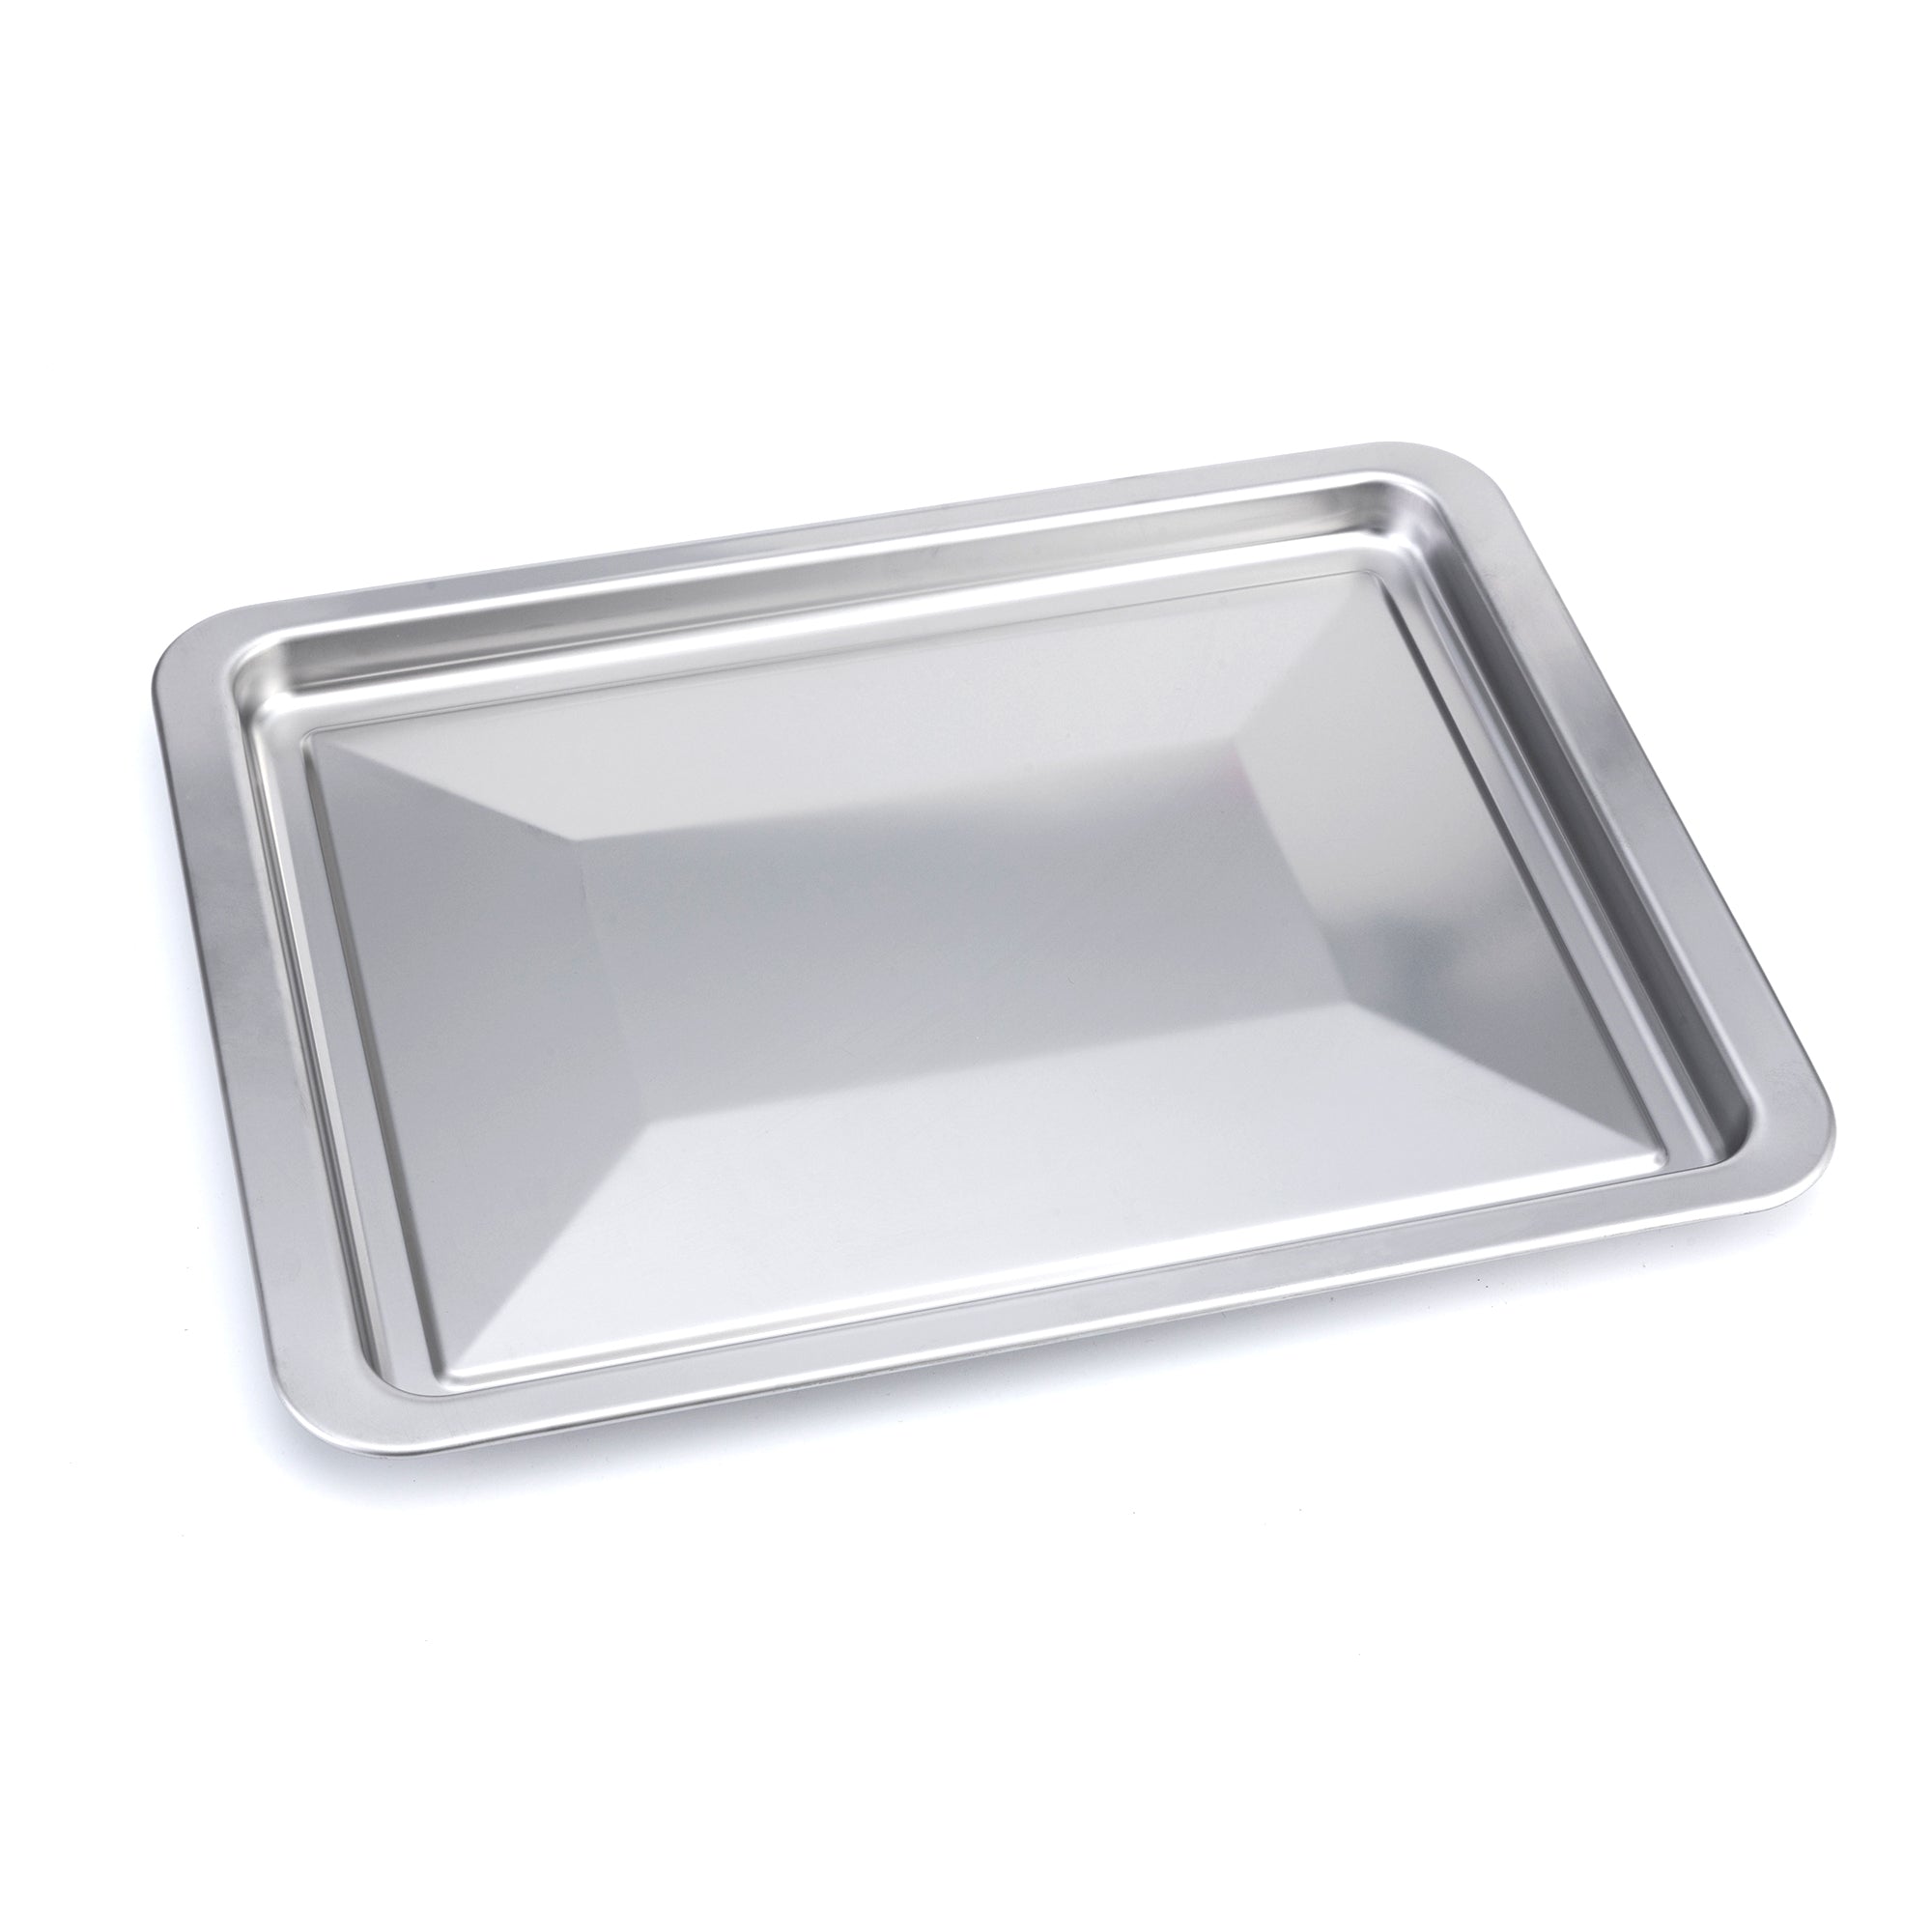 Baking Tray for ChefCubii? Series